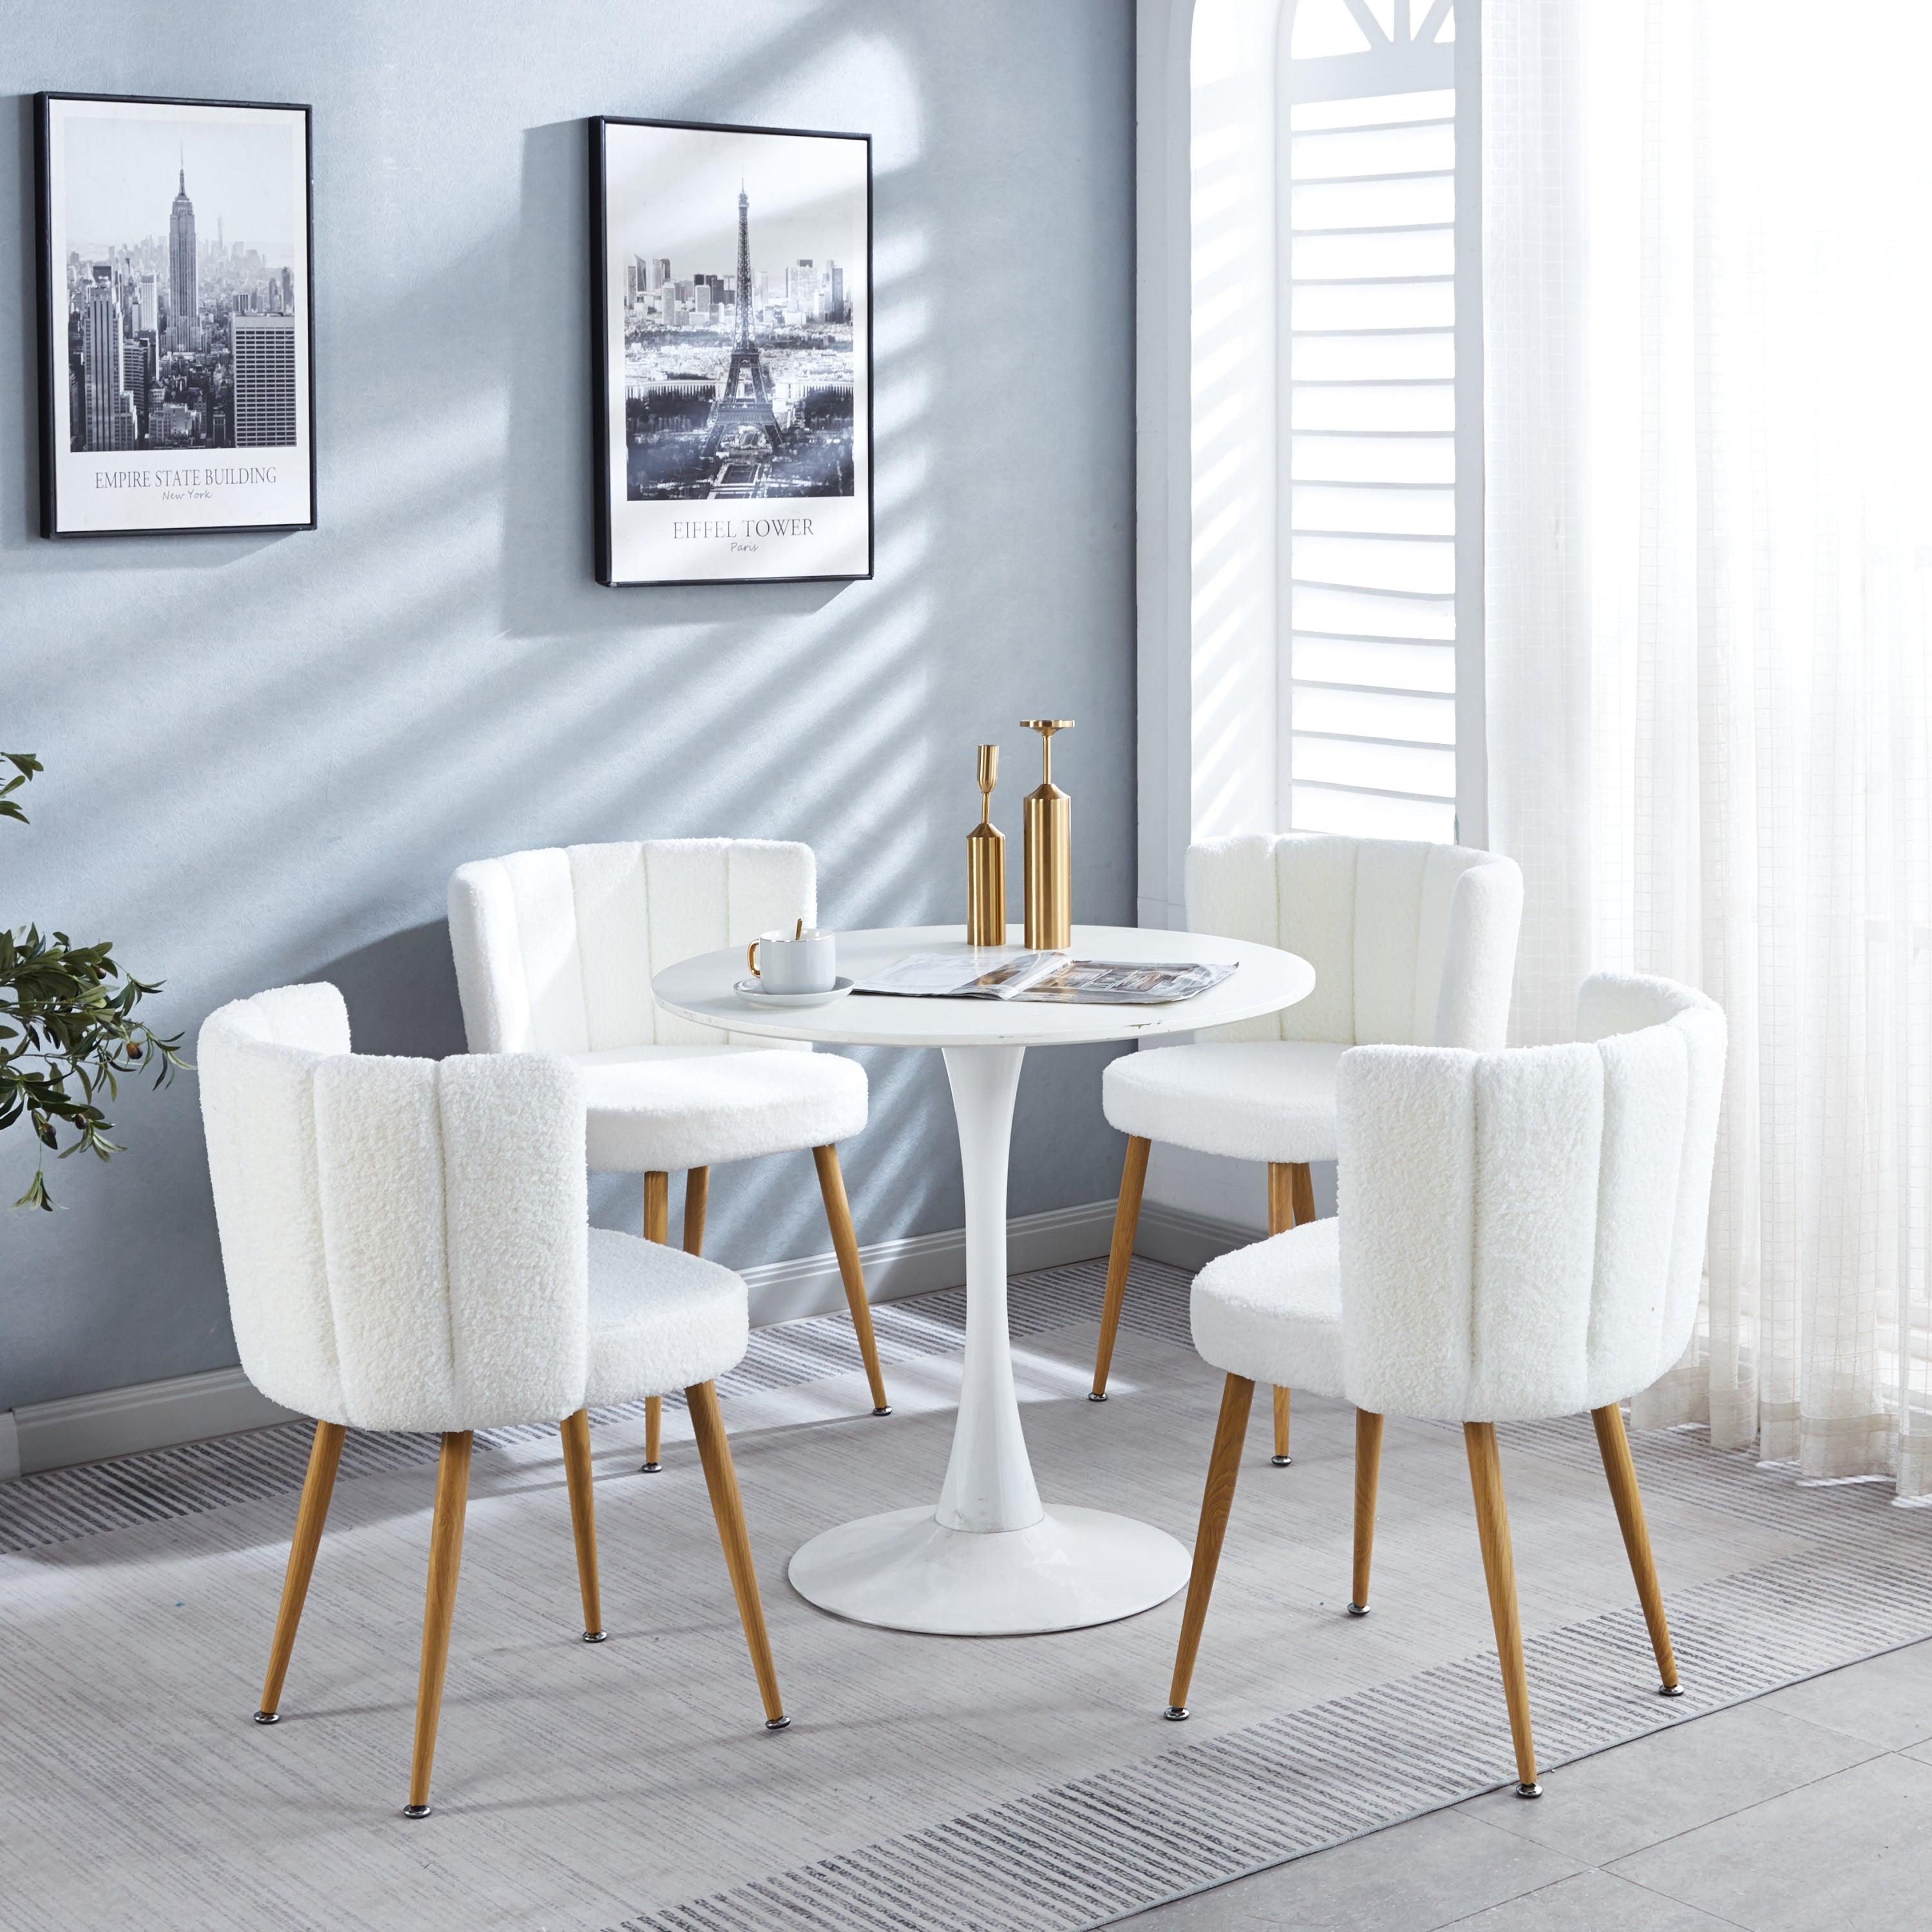 🆓🚛 5 Piece Dining Room Set, 1 Circular Table, 4 Moon Chairs